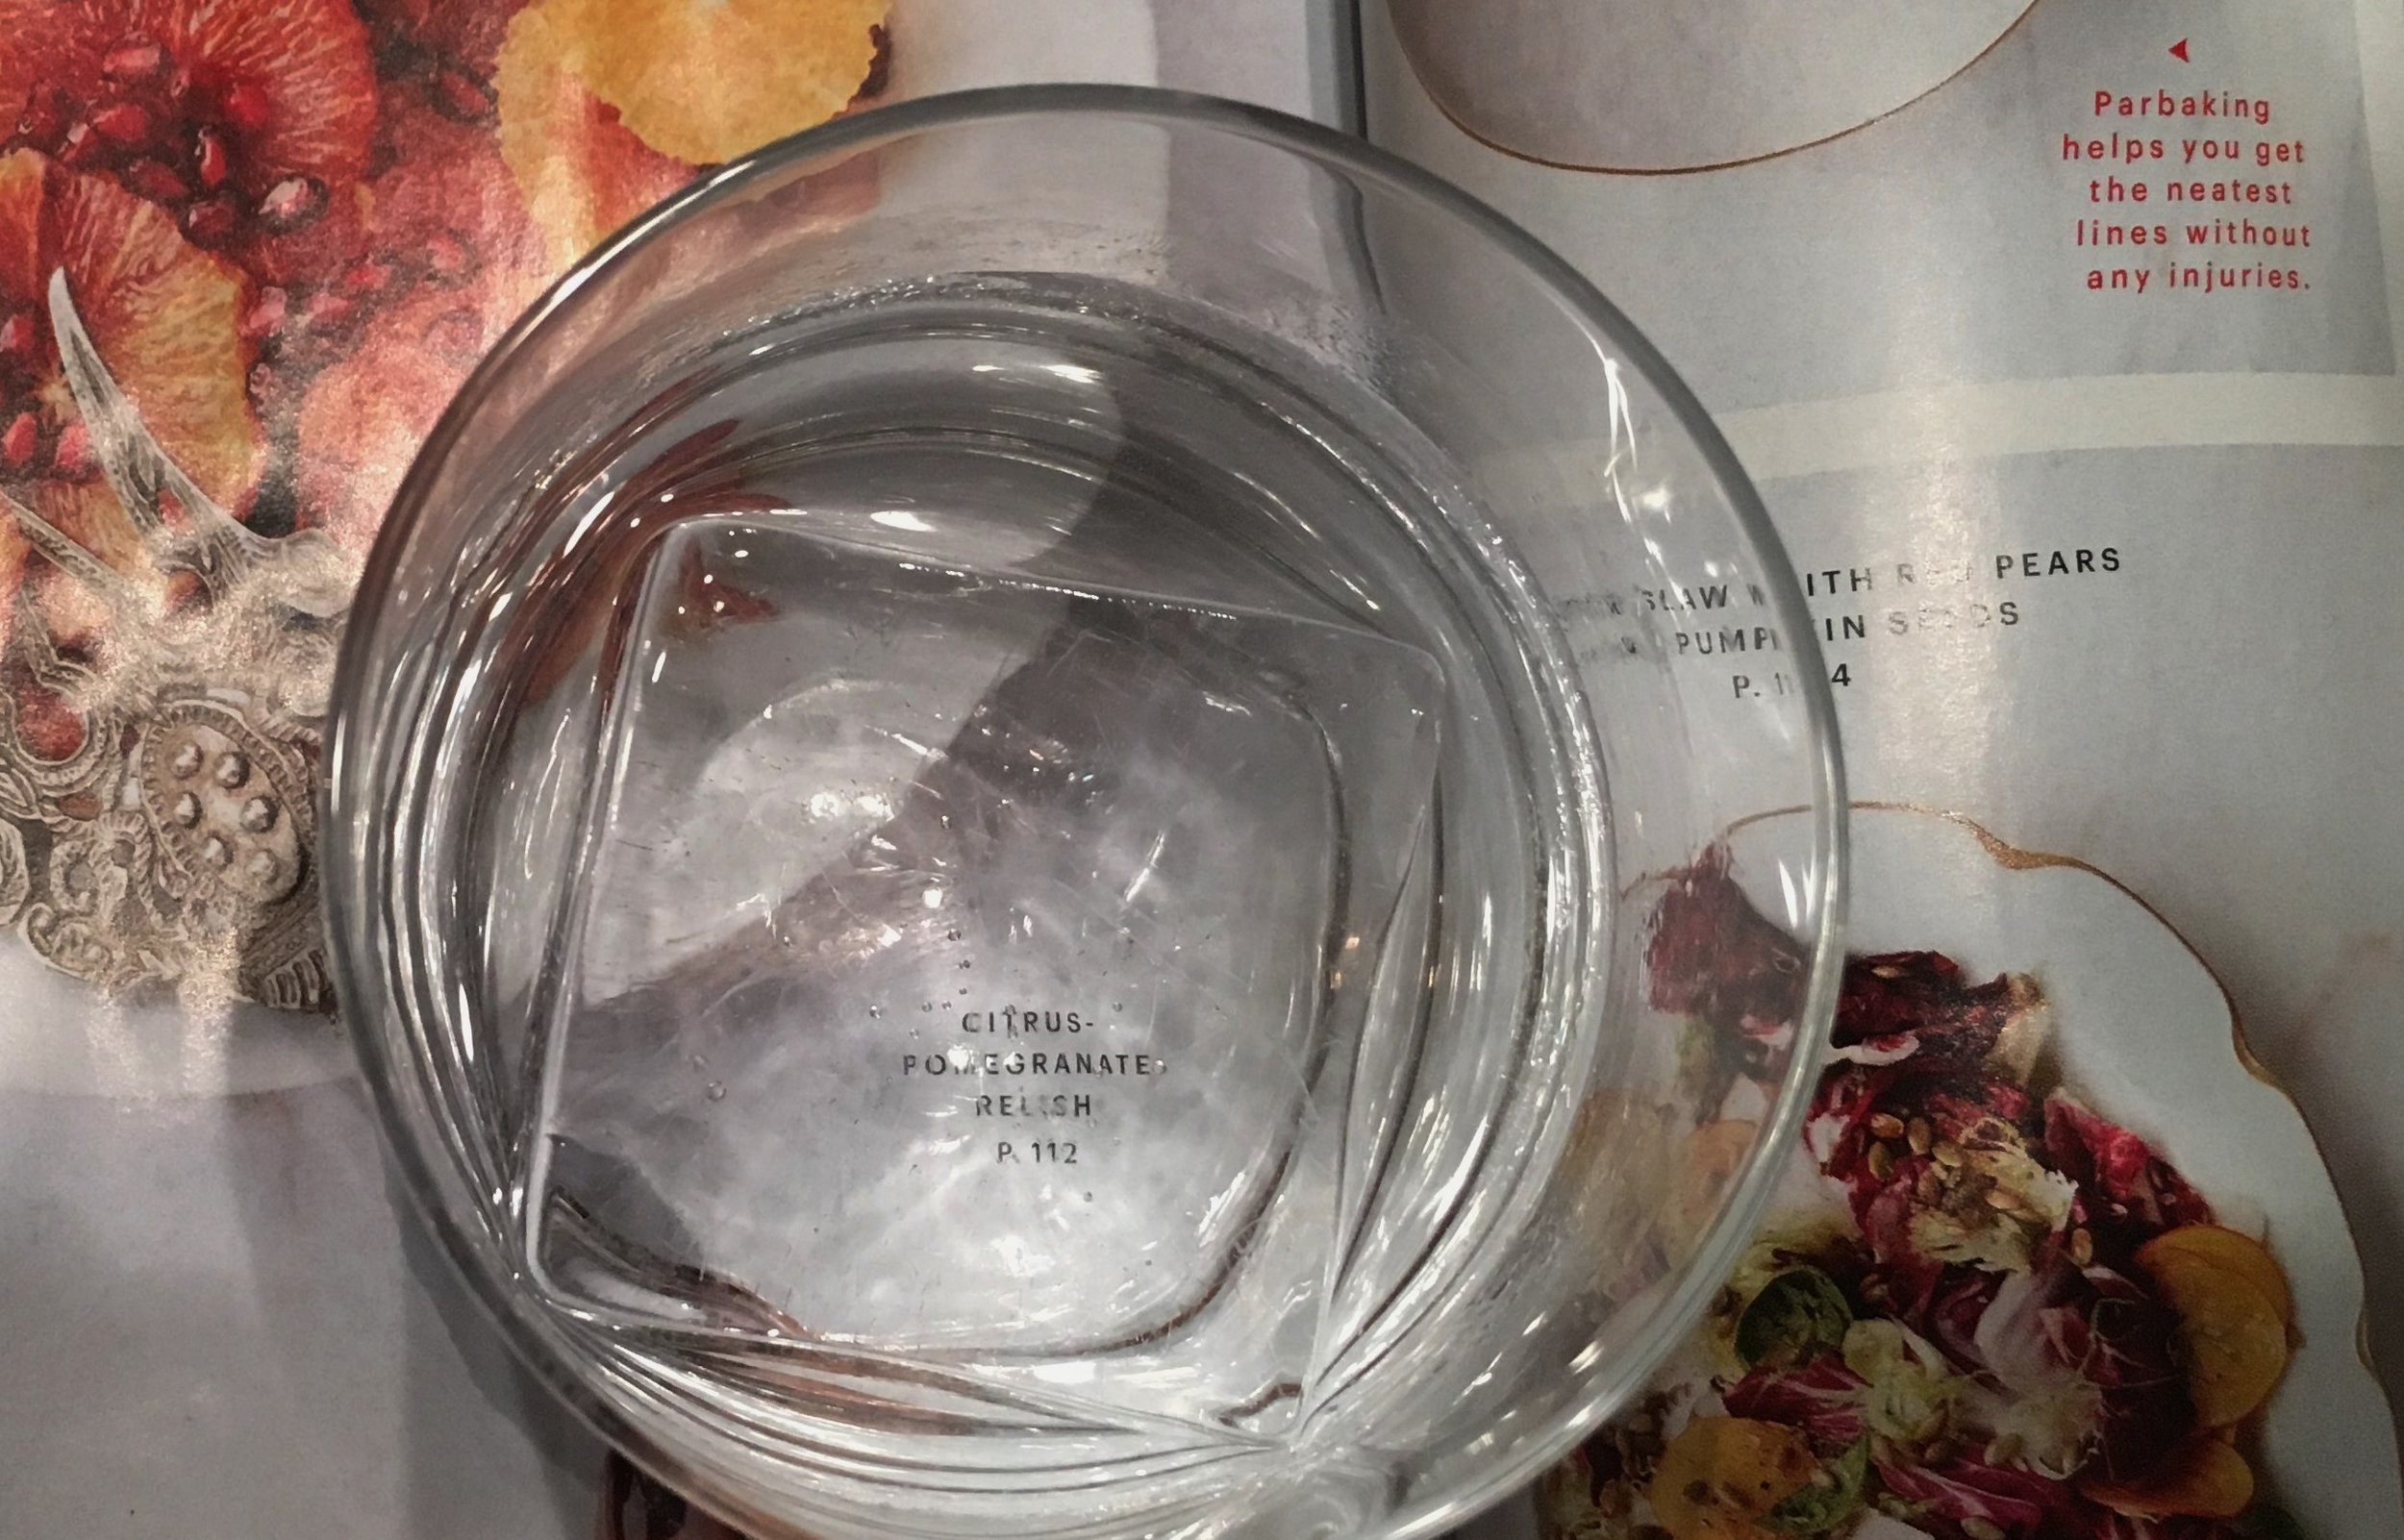 True Cubes  Crystal Clear Ice Cubes Made Simple by True Cubes — Kickstarter